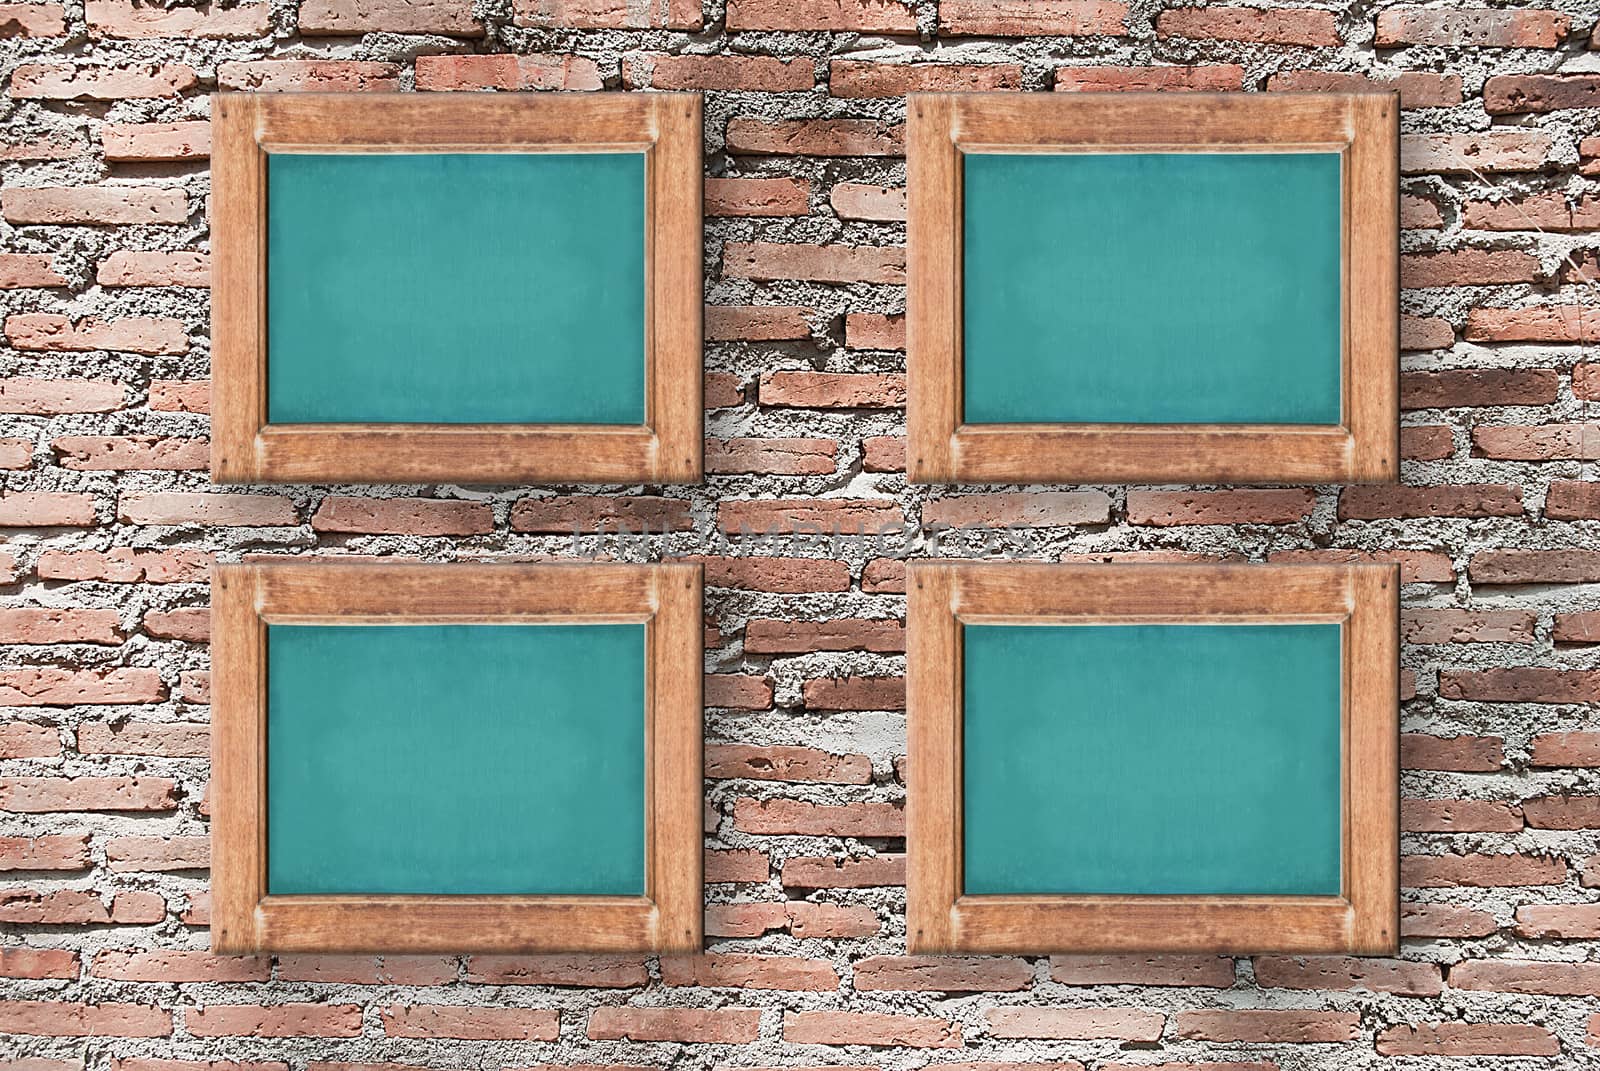 Image of chalkboard on brick wall texture, background for design with copy space for text or image.